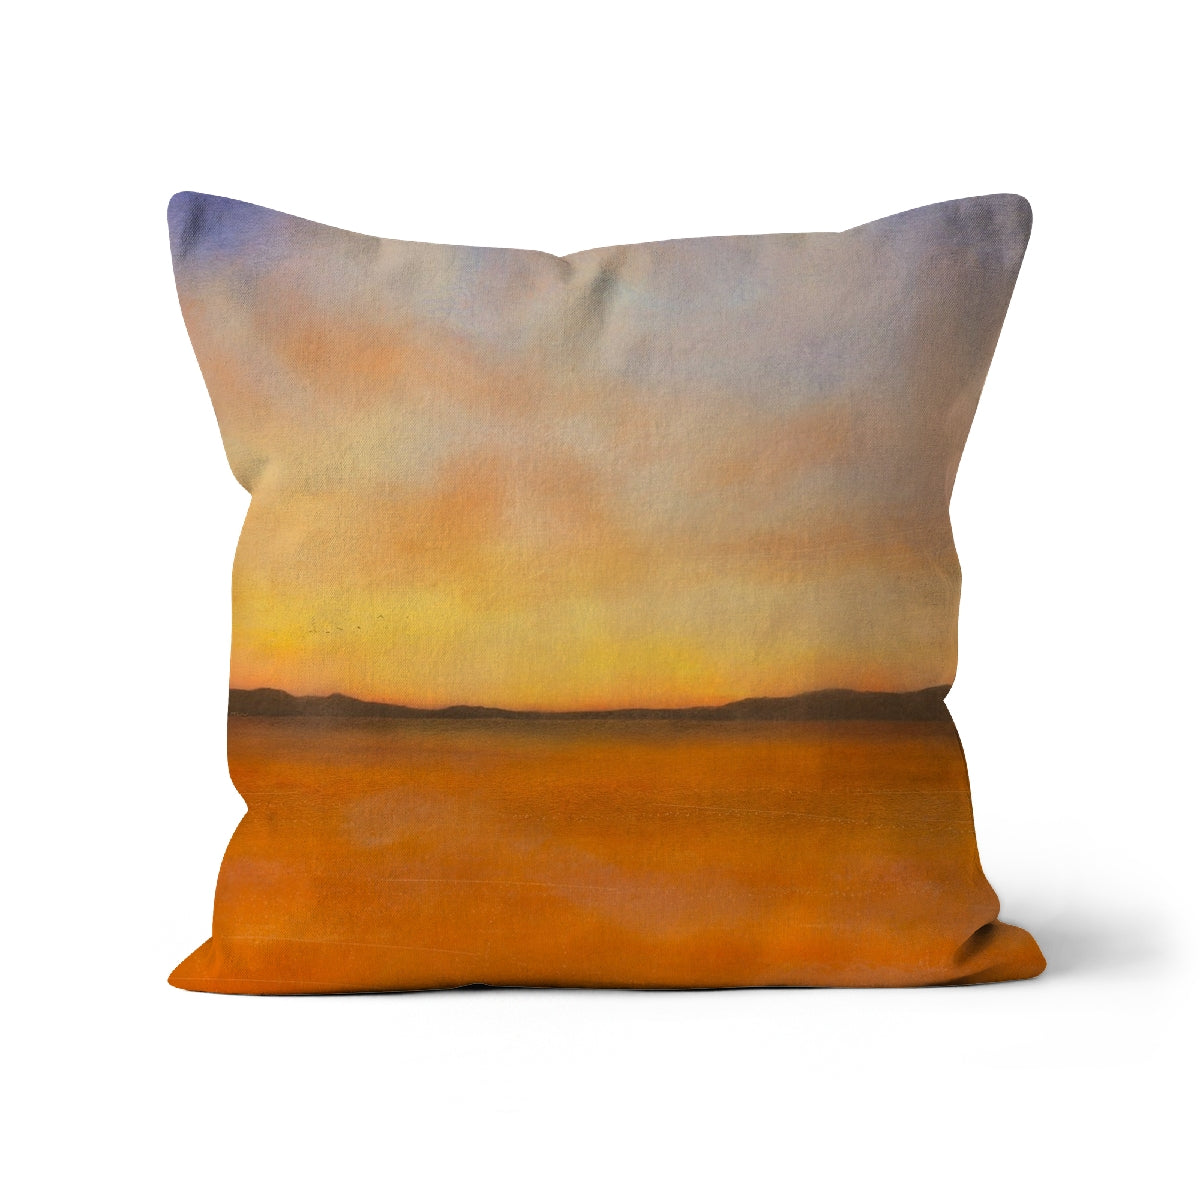 Islay Dawn Art Gifts Cushion-Cushions-Hebridean Islands Art Gallery-Faux Suede-16"x16"-Paintings, Prints, Homeware, Art Gifts From Scotland By Scottish Artist Kevin Hunter